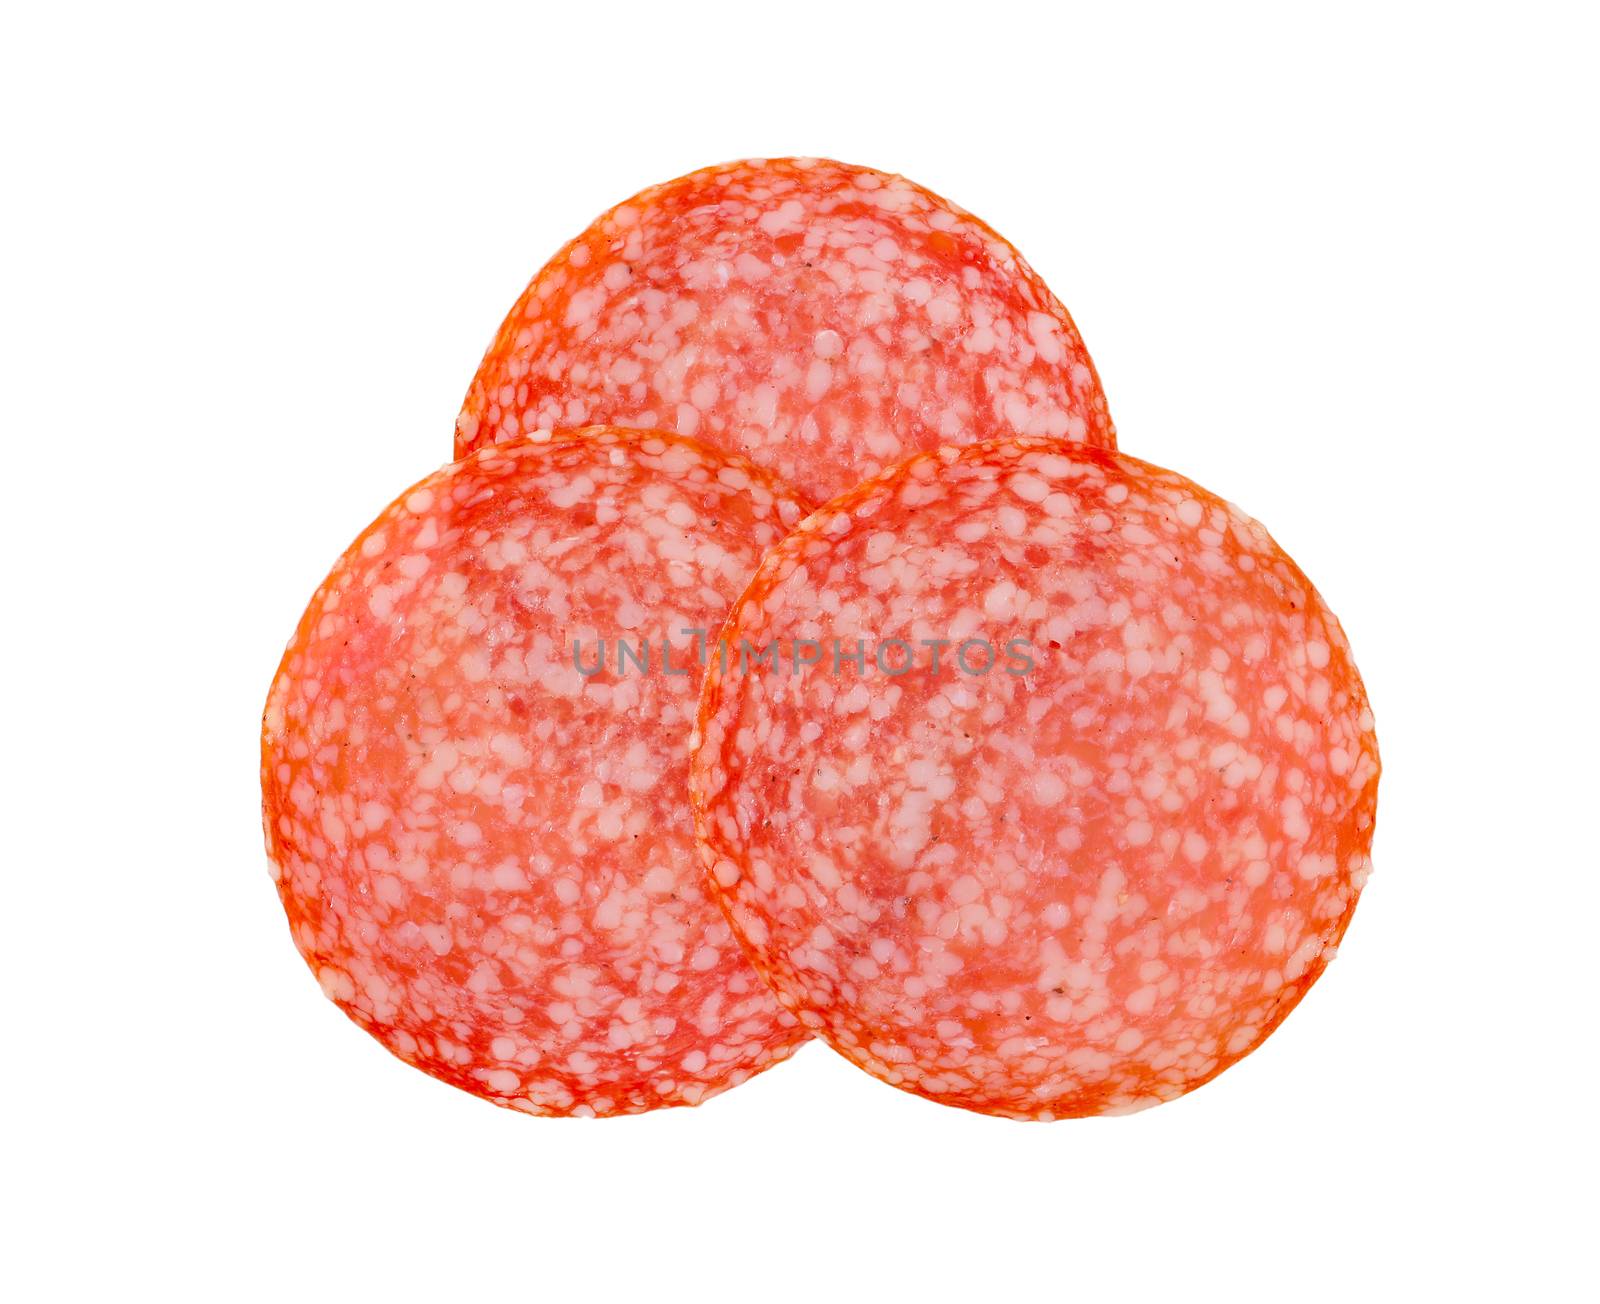 Thin slices of Hungarian salami isolated on white